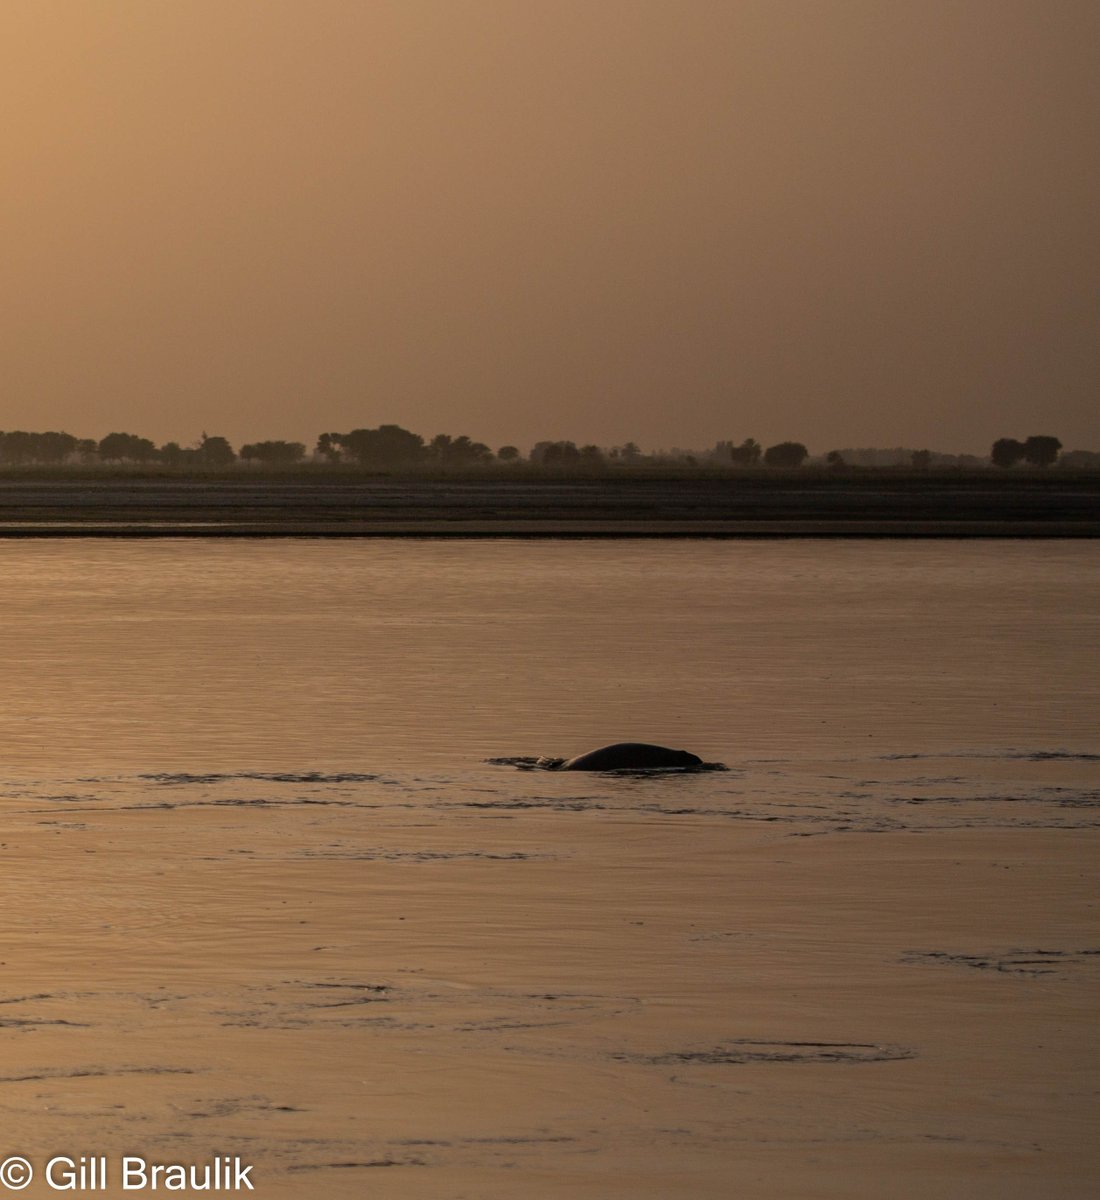 Interested in marine mammal conservation? Check out this new fully funded @SUPERDTP1 PhD opportunity from SMRU researcher @GillBraulik and colleagues on Indus River dolphin. Come and study @univofstandrews ! Closing date: 14th Feb findaphd.com/phds/project/a…